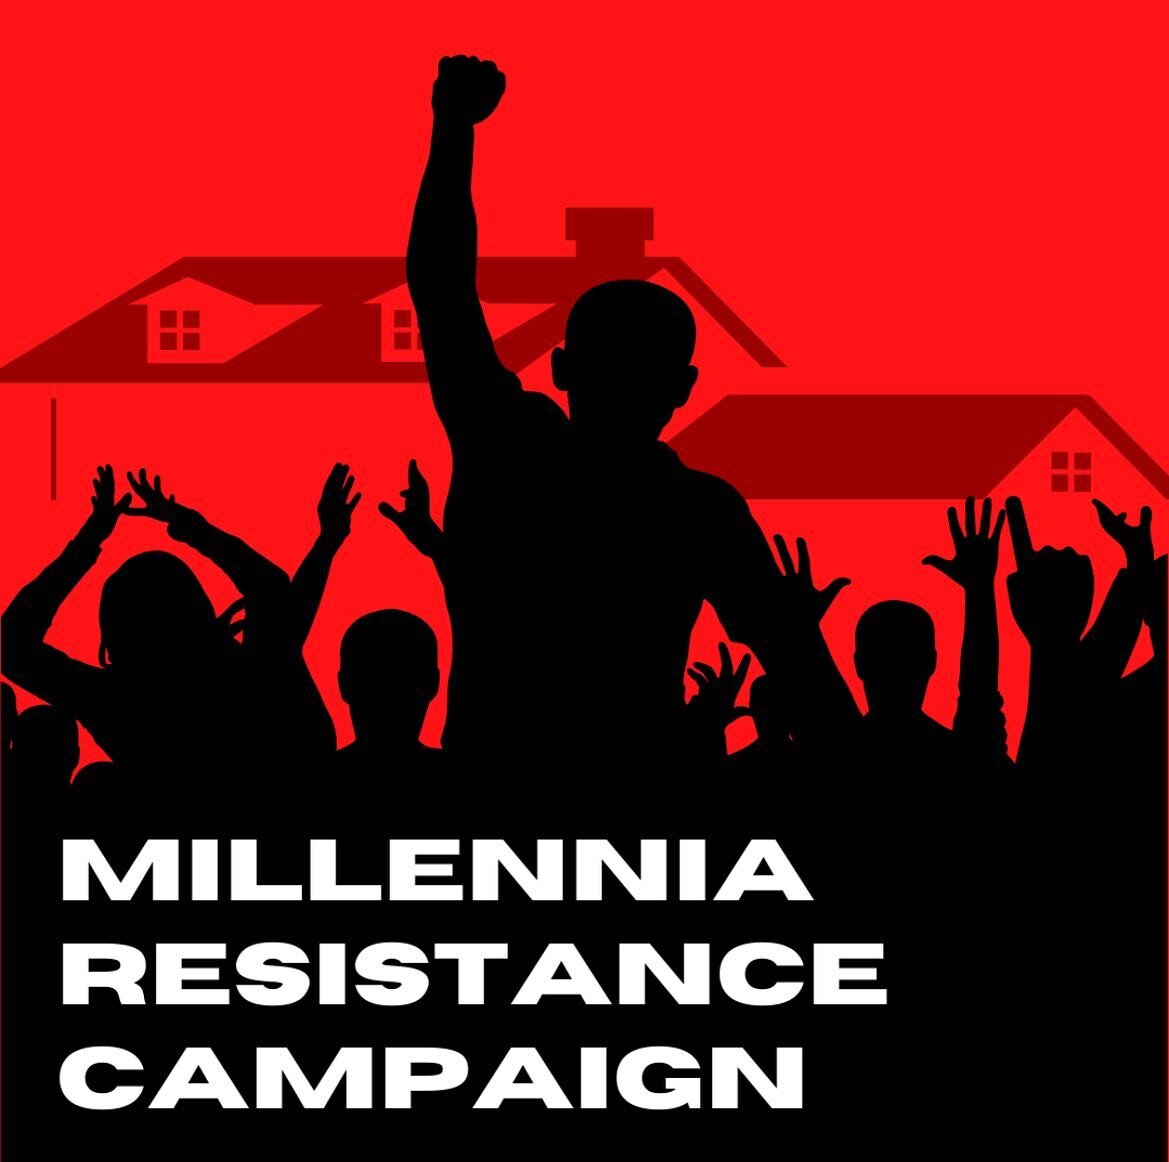 HJL stands with Millennia tenants around the country who are fighting back against horrific living conditions and harassment from management. Learn more about their stories and how you can support their campaign by following @millenniaresistance #Mil